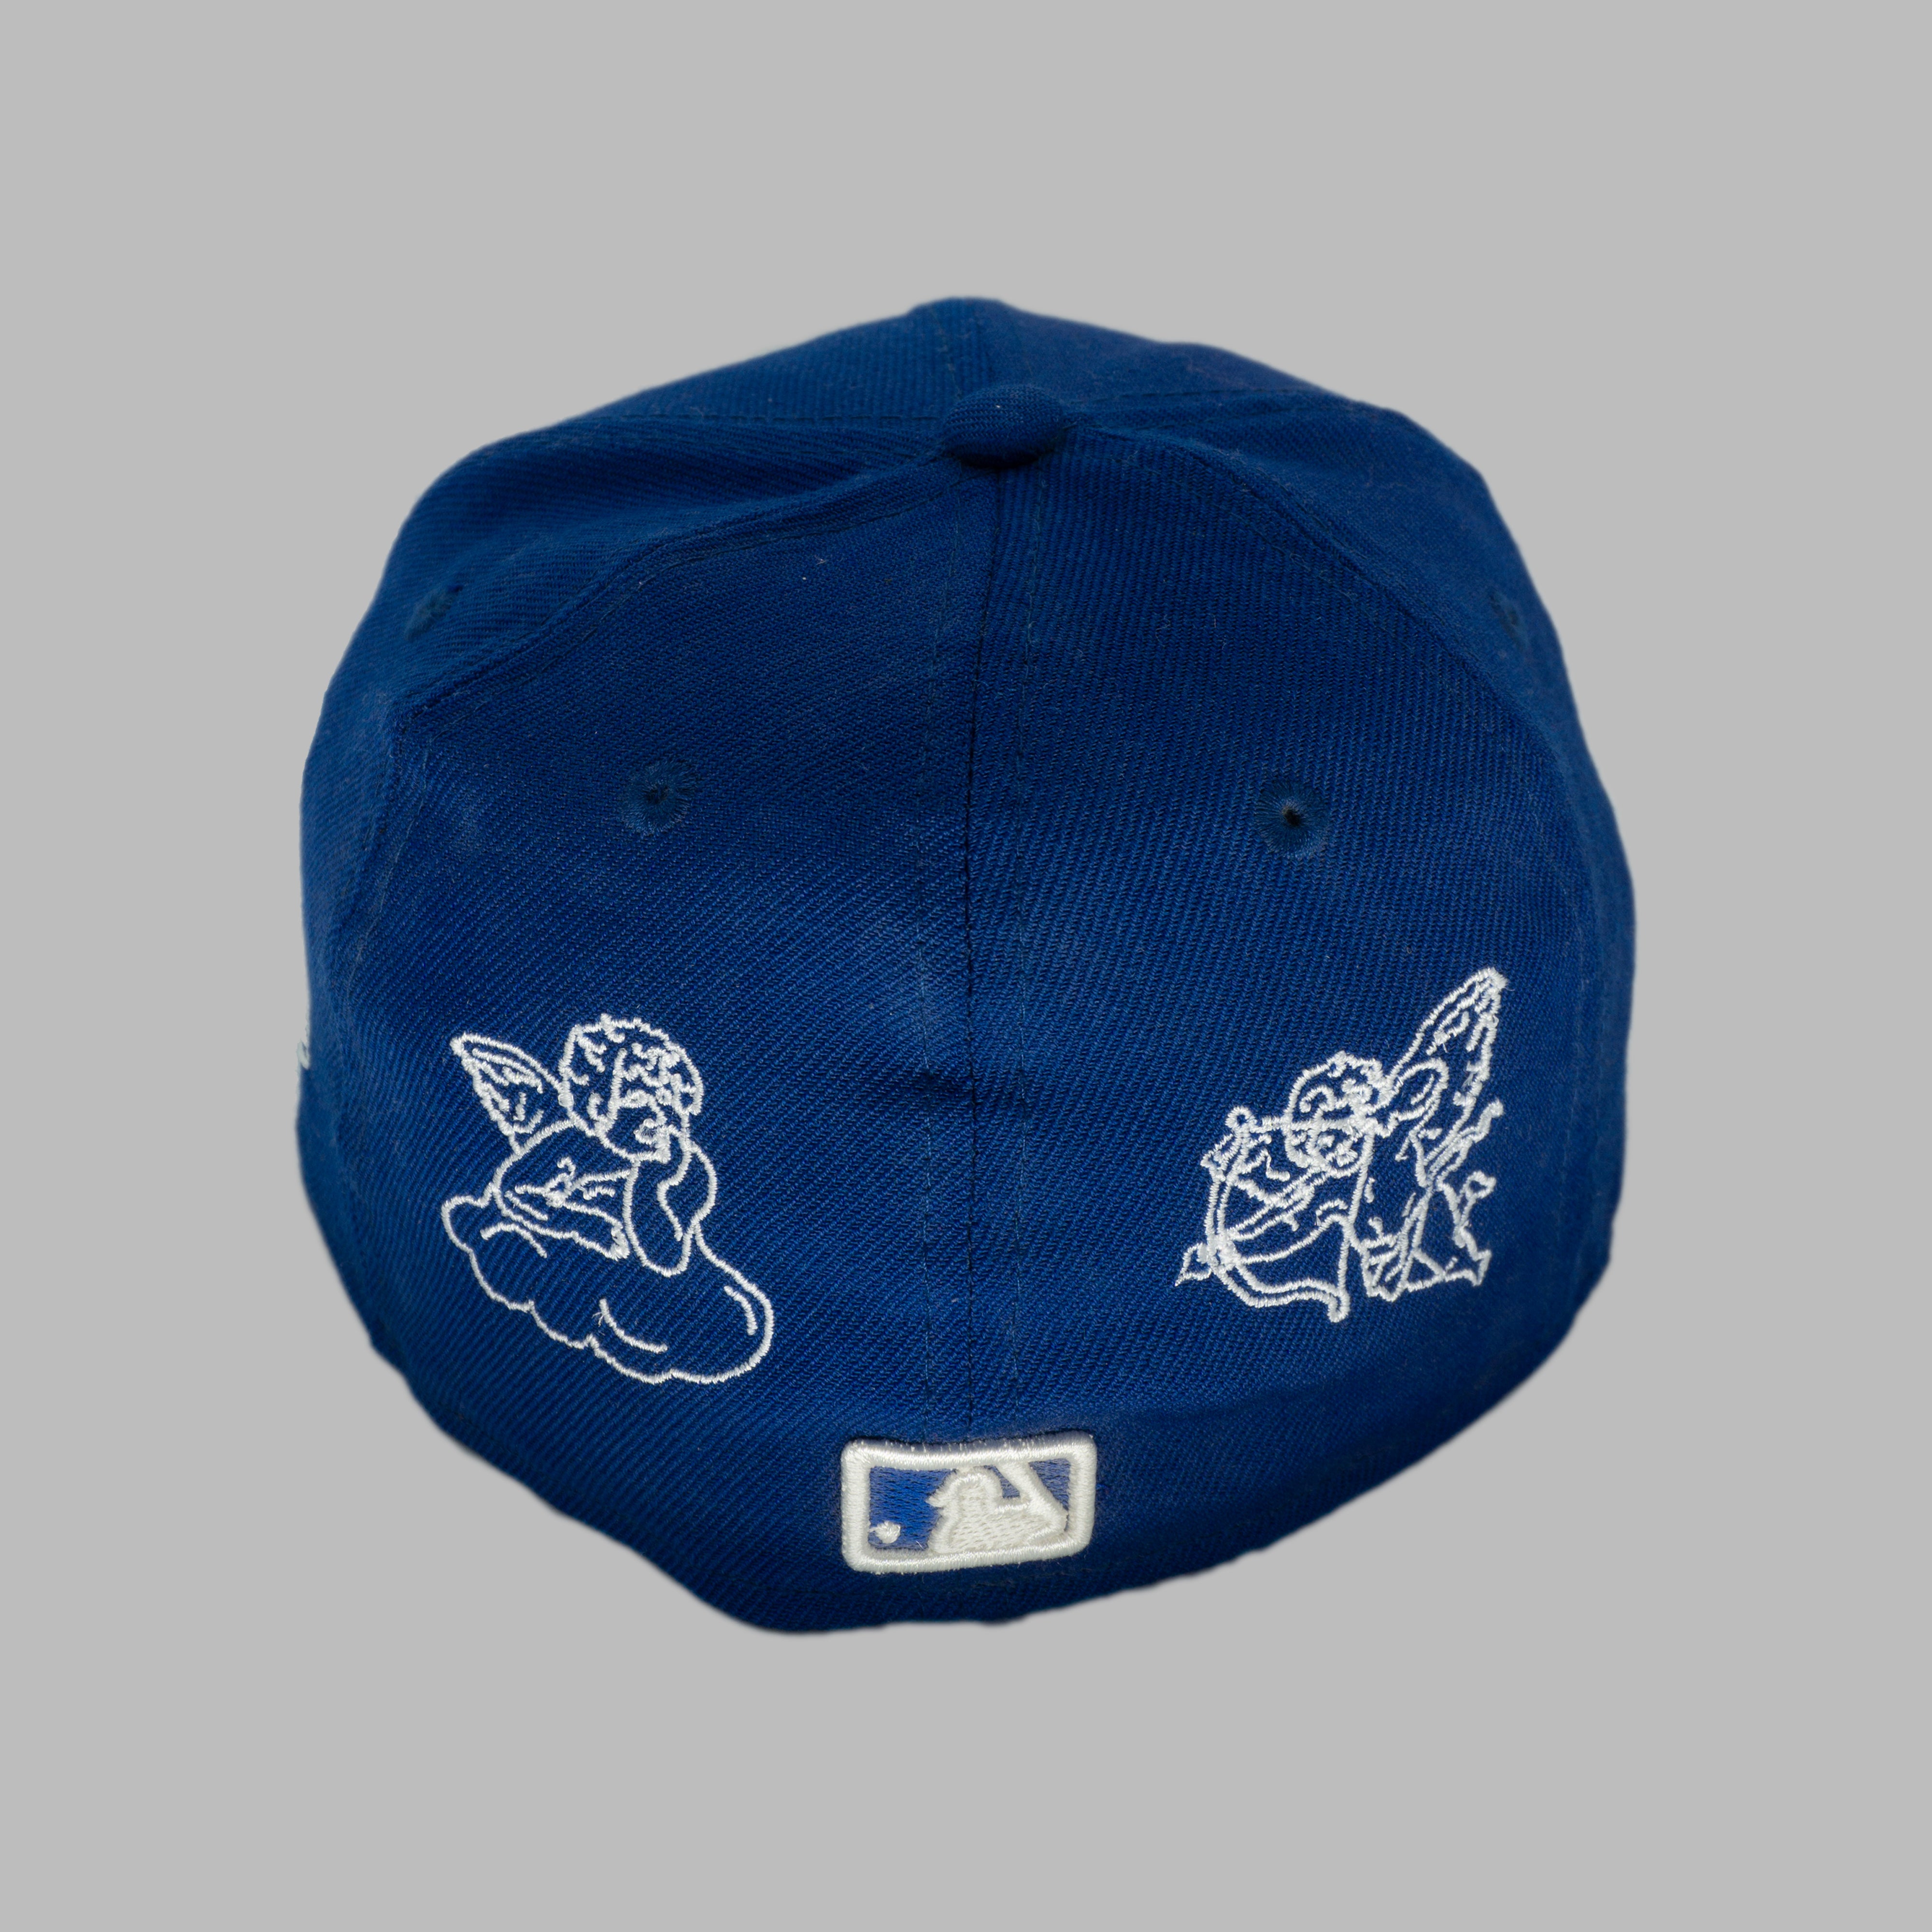 BLUE HOLY FITTED (size 7)